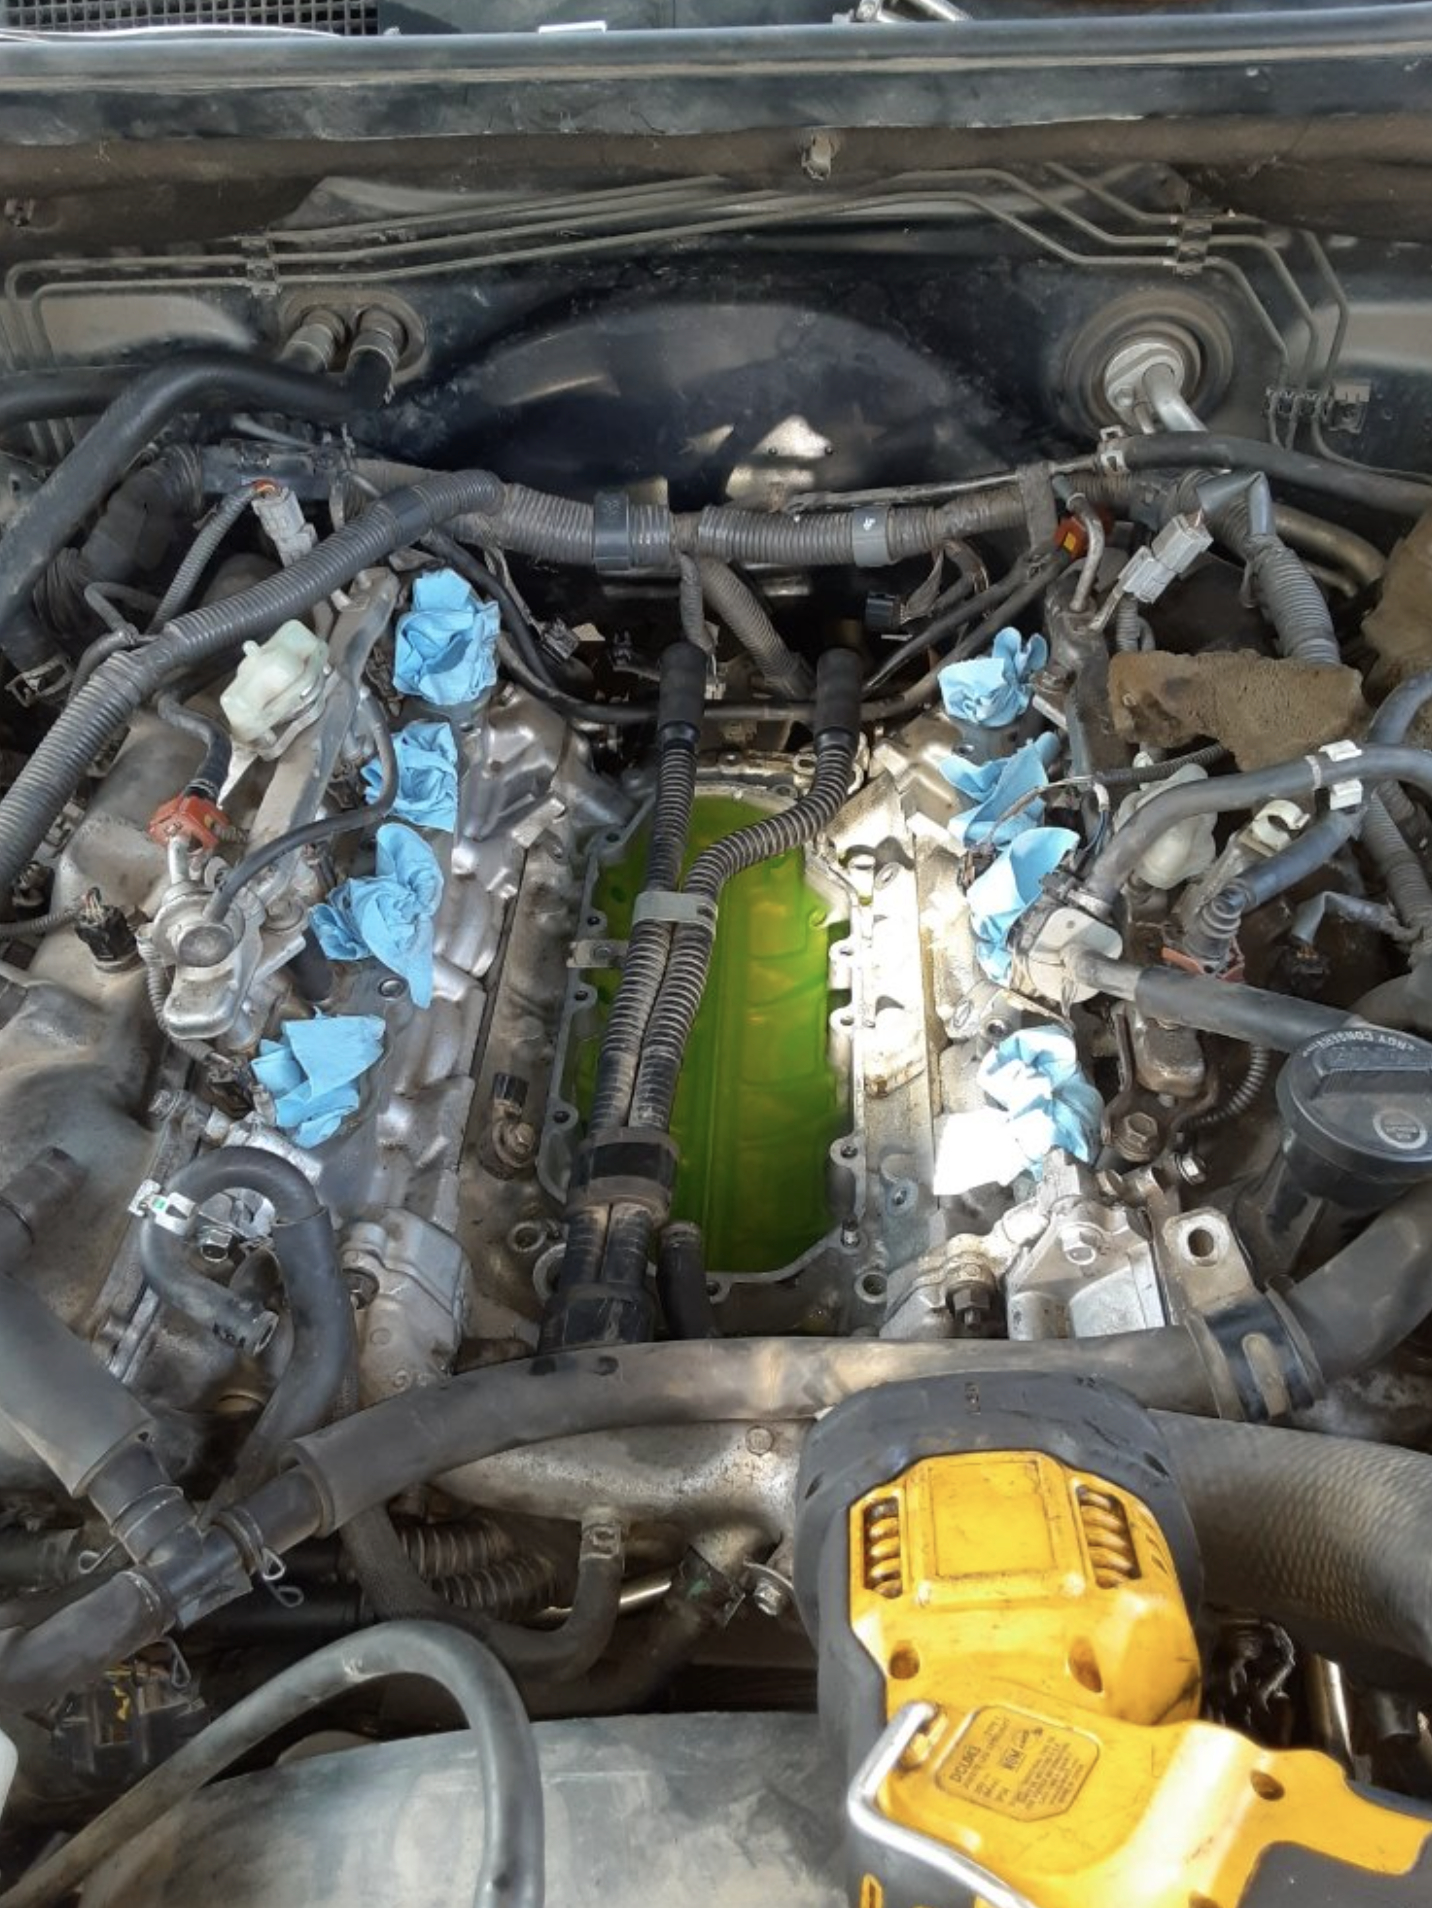 this image shows spark plugs and ignition coil in Fort Wayne, IN